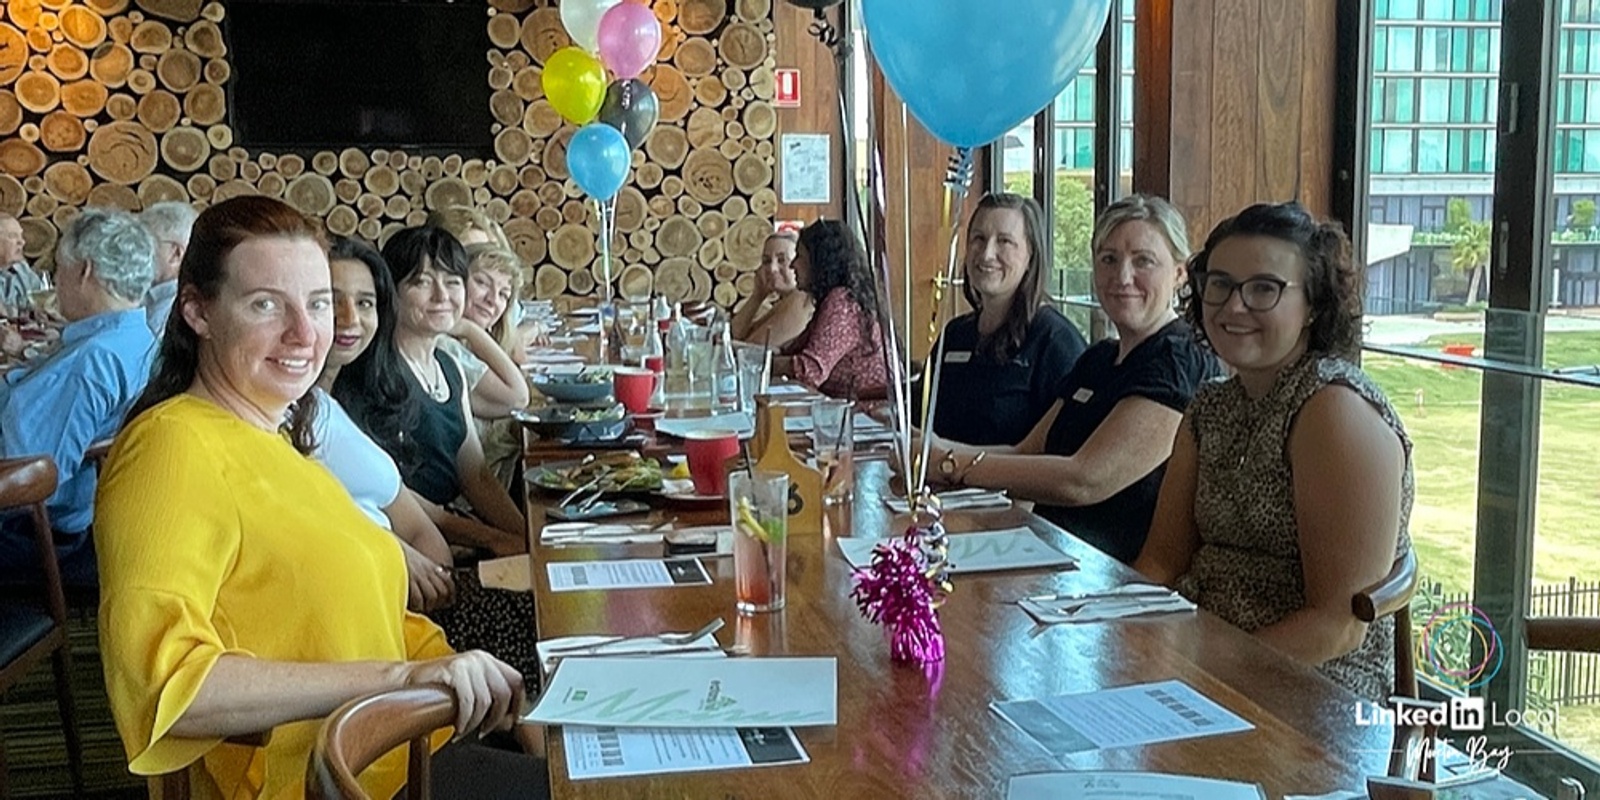 Banner image for Women In Business Lunch - LinkedIn Local Moreton Bay - March 2023